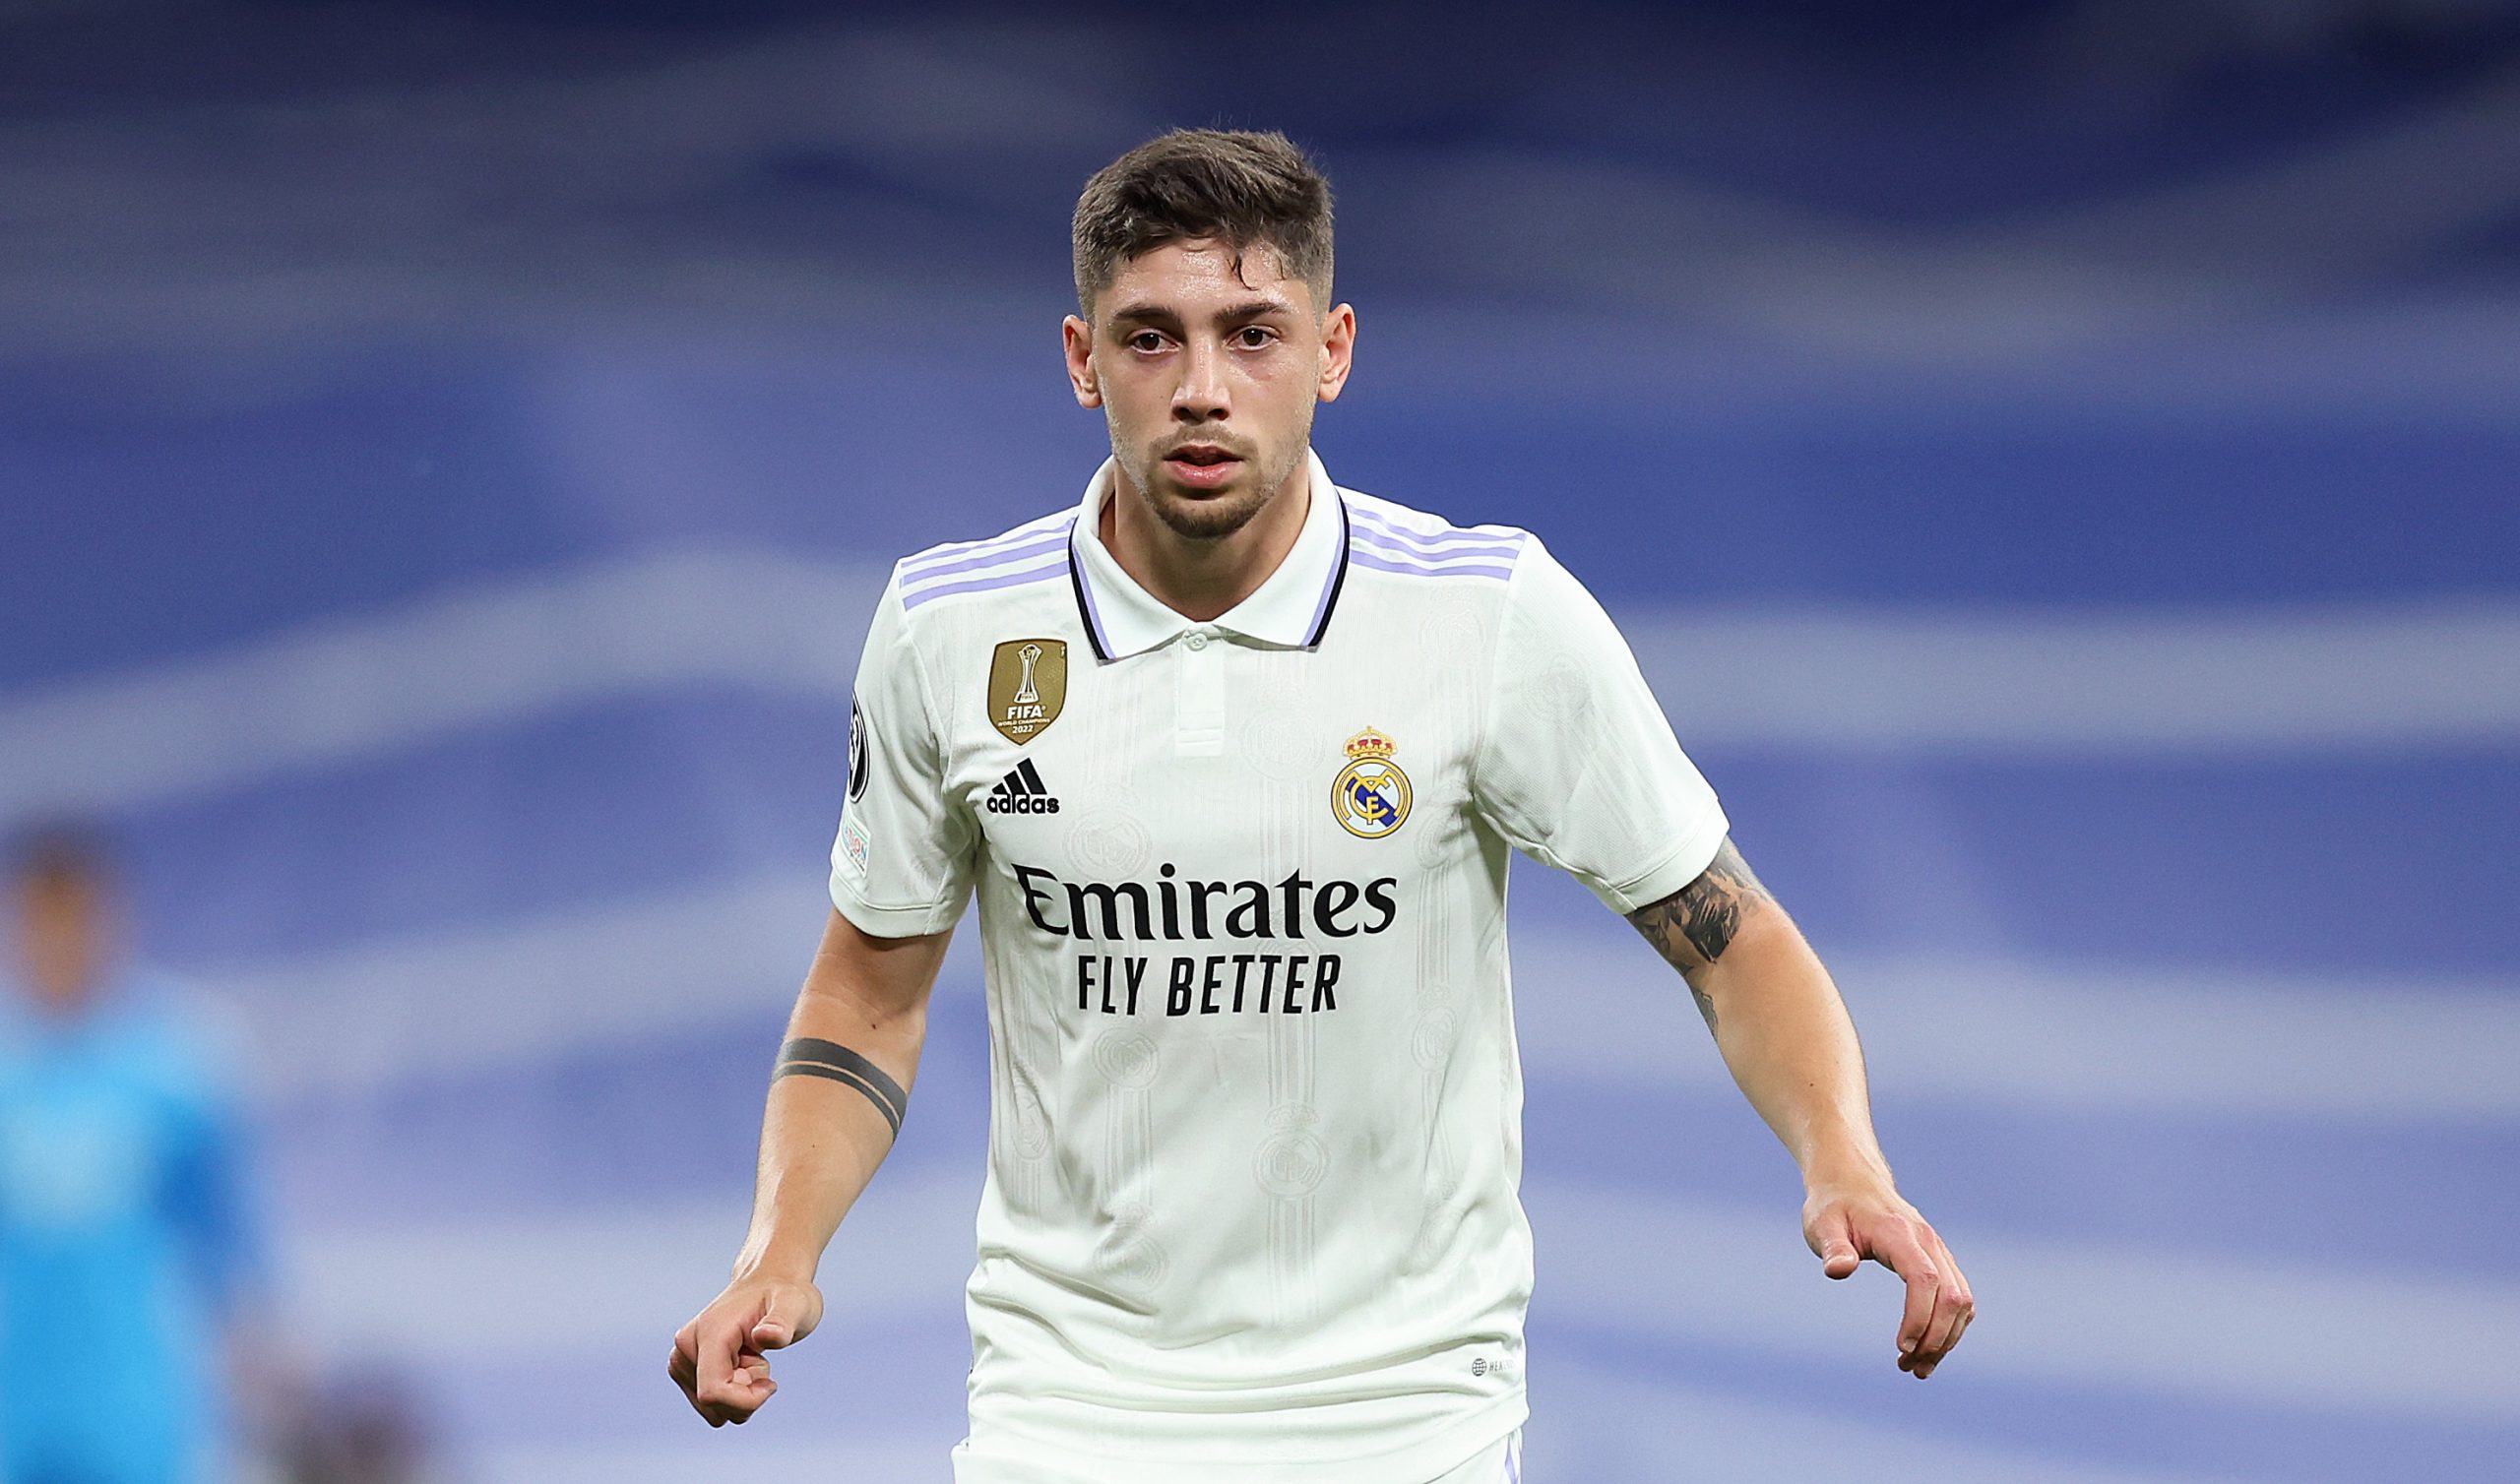 Federico Valverde of Real Madrid during the UEFA Champions League semi-final against Manchester City.